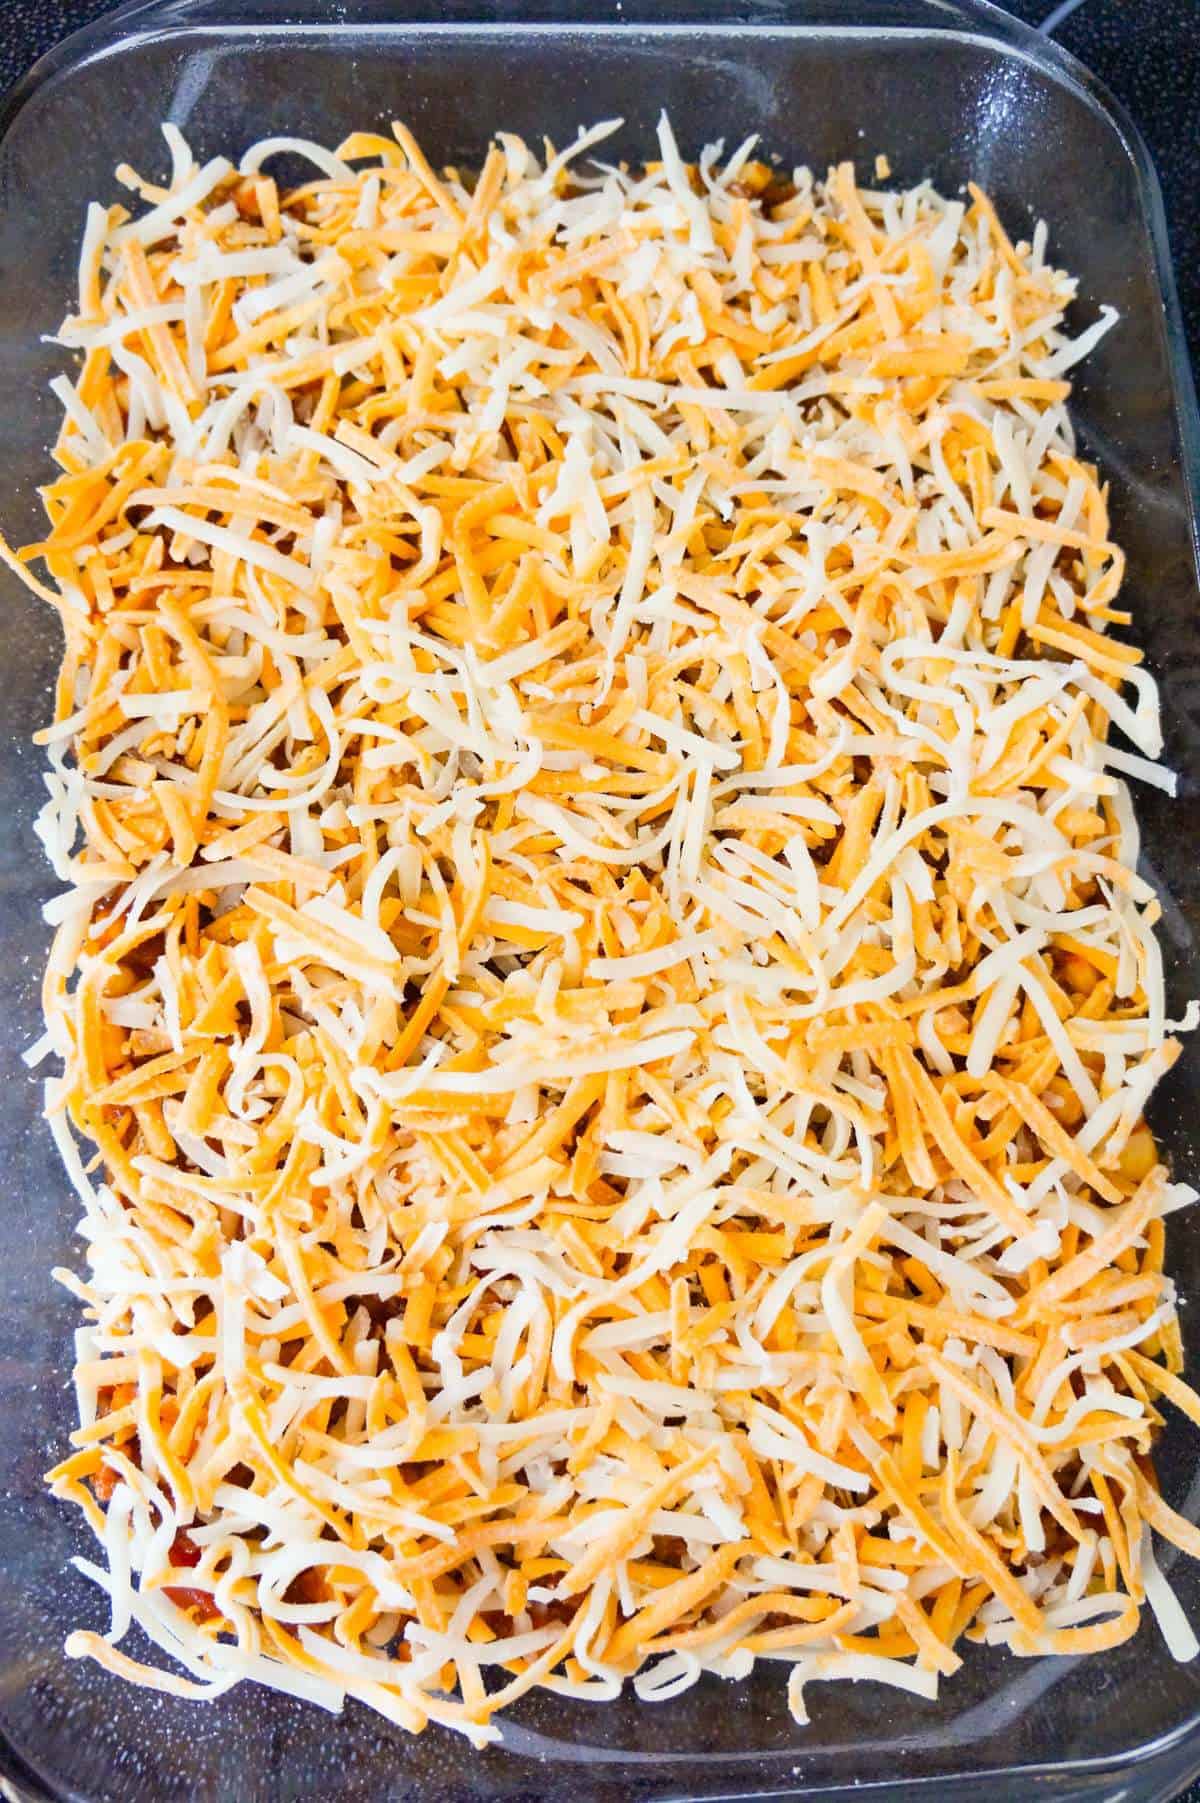 shredded cheese on top of chili pie